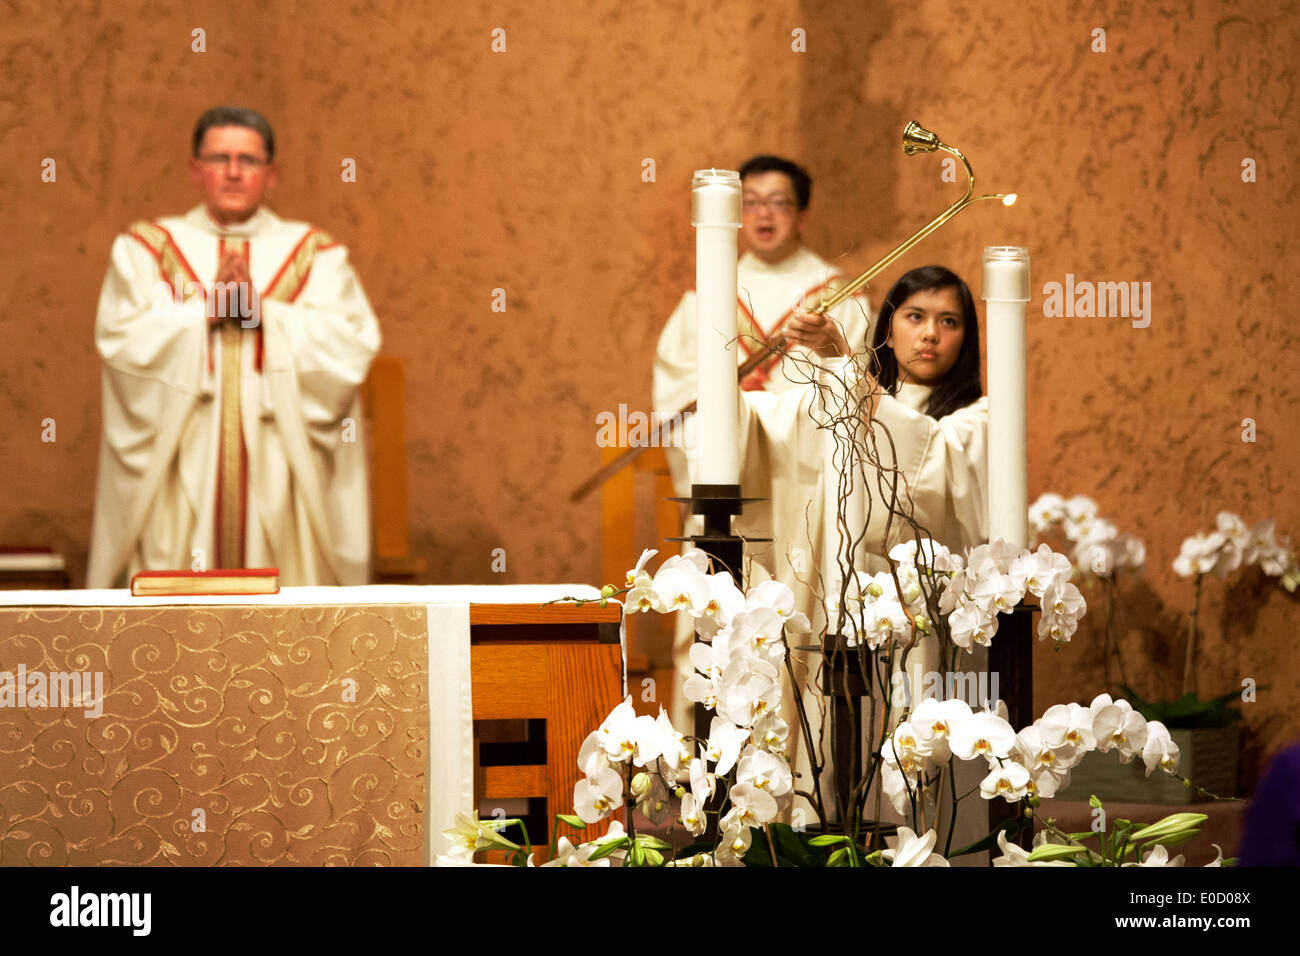 A young Hispanic altar server lights ceremonial candles at St. Timothy's Catholic Church, Laguna Niguel, CA, at the start of the Solemn Liturgy of Good Friday. Note pastor and Vietnamese assistant pastor in vestments. Stock Photo